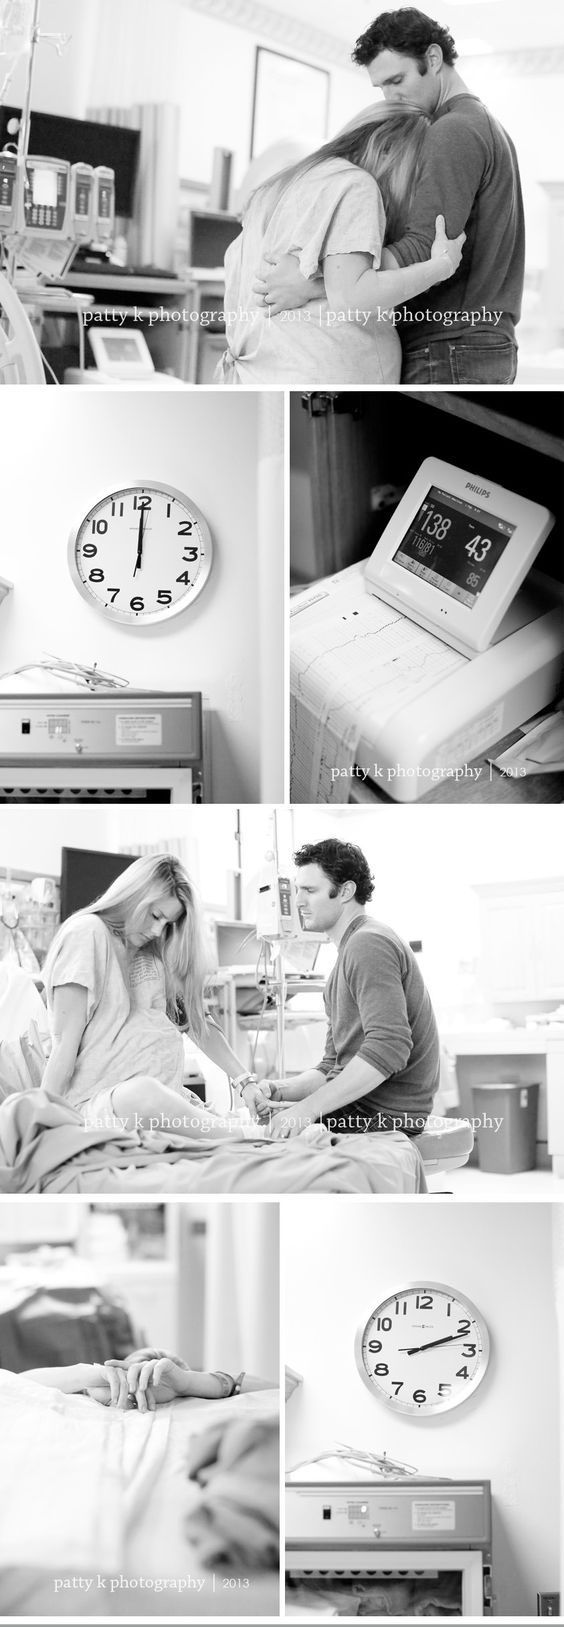 Collection of images in black and white of scenes from hospital room while in labor: clock, mom's hands, mom and dad holding hands, and blood pressure readouts.